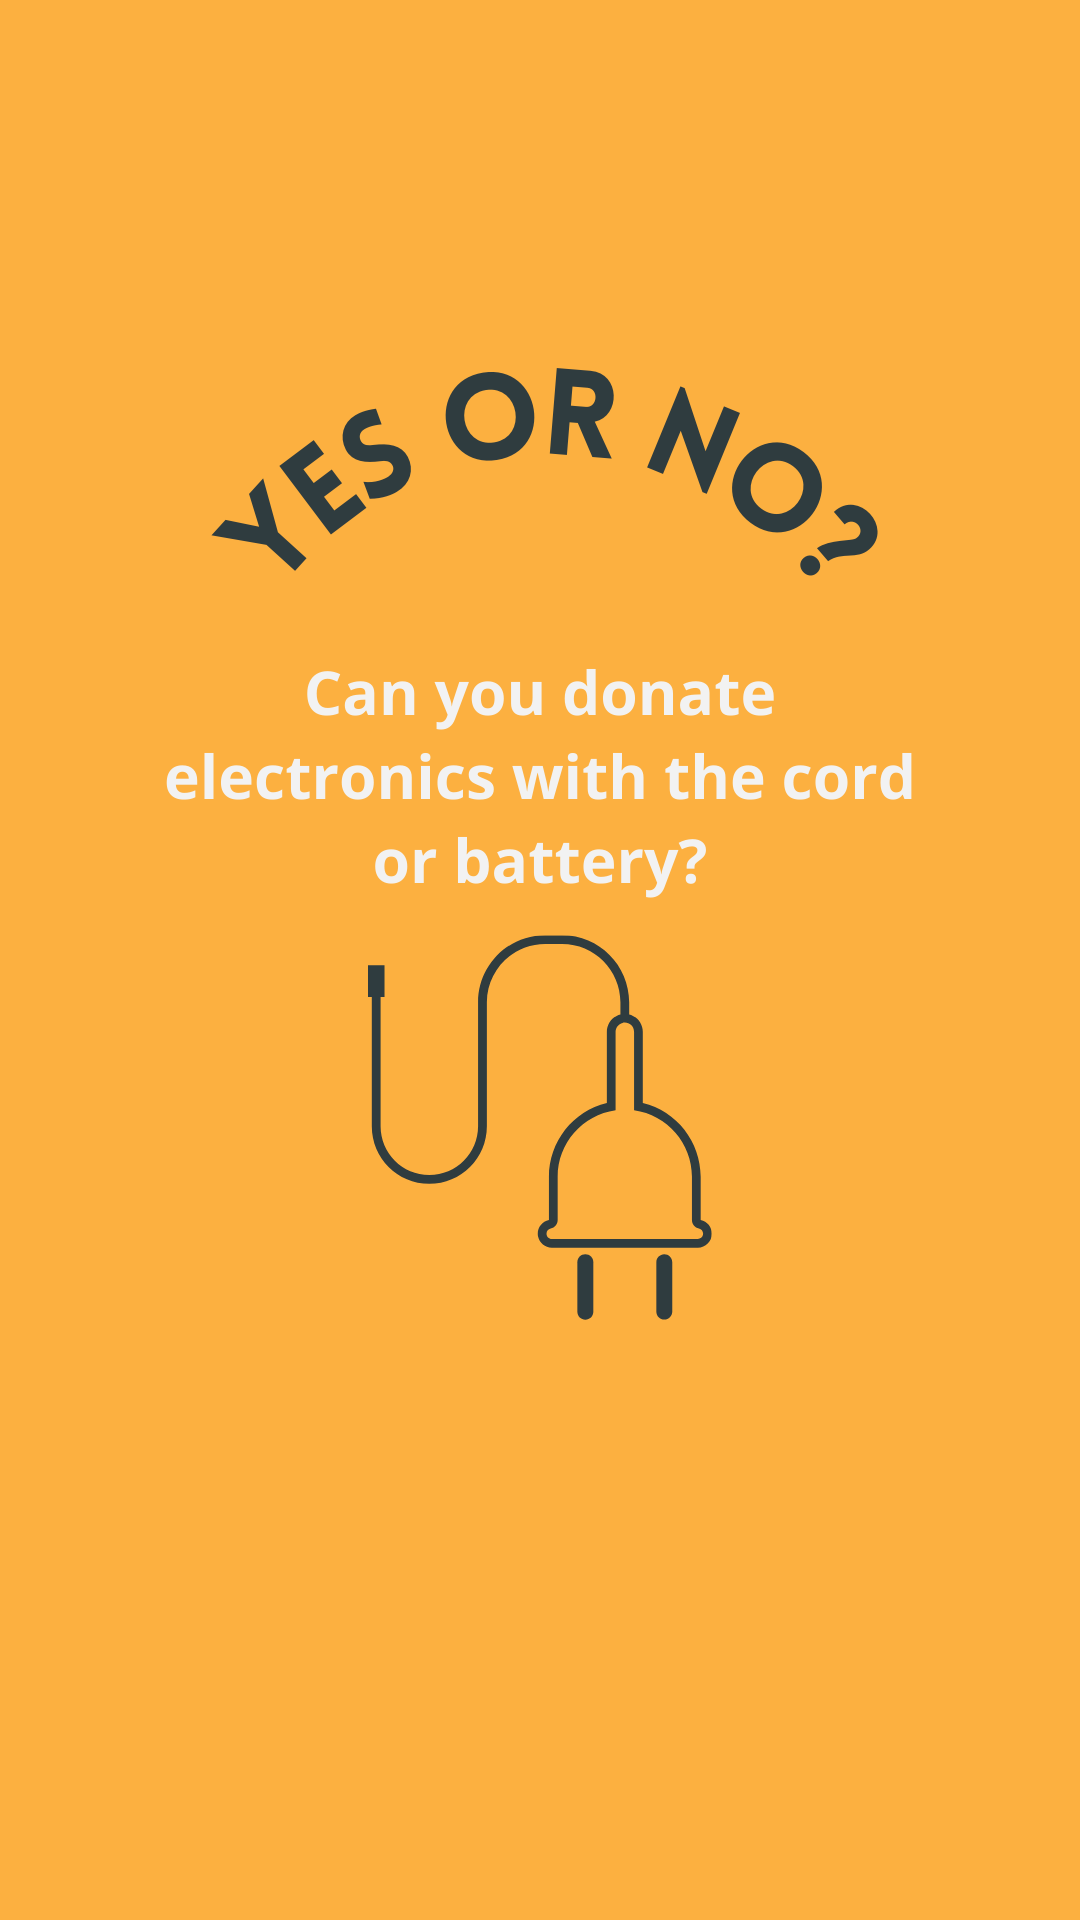 goodwill poster on donating electronics